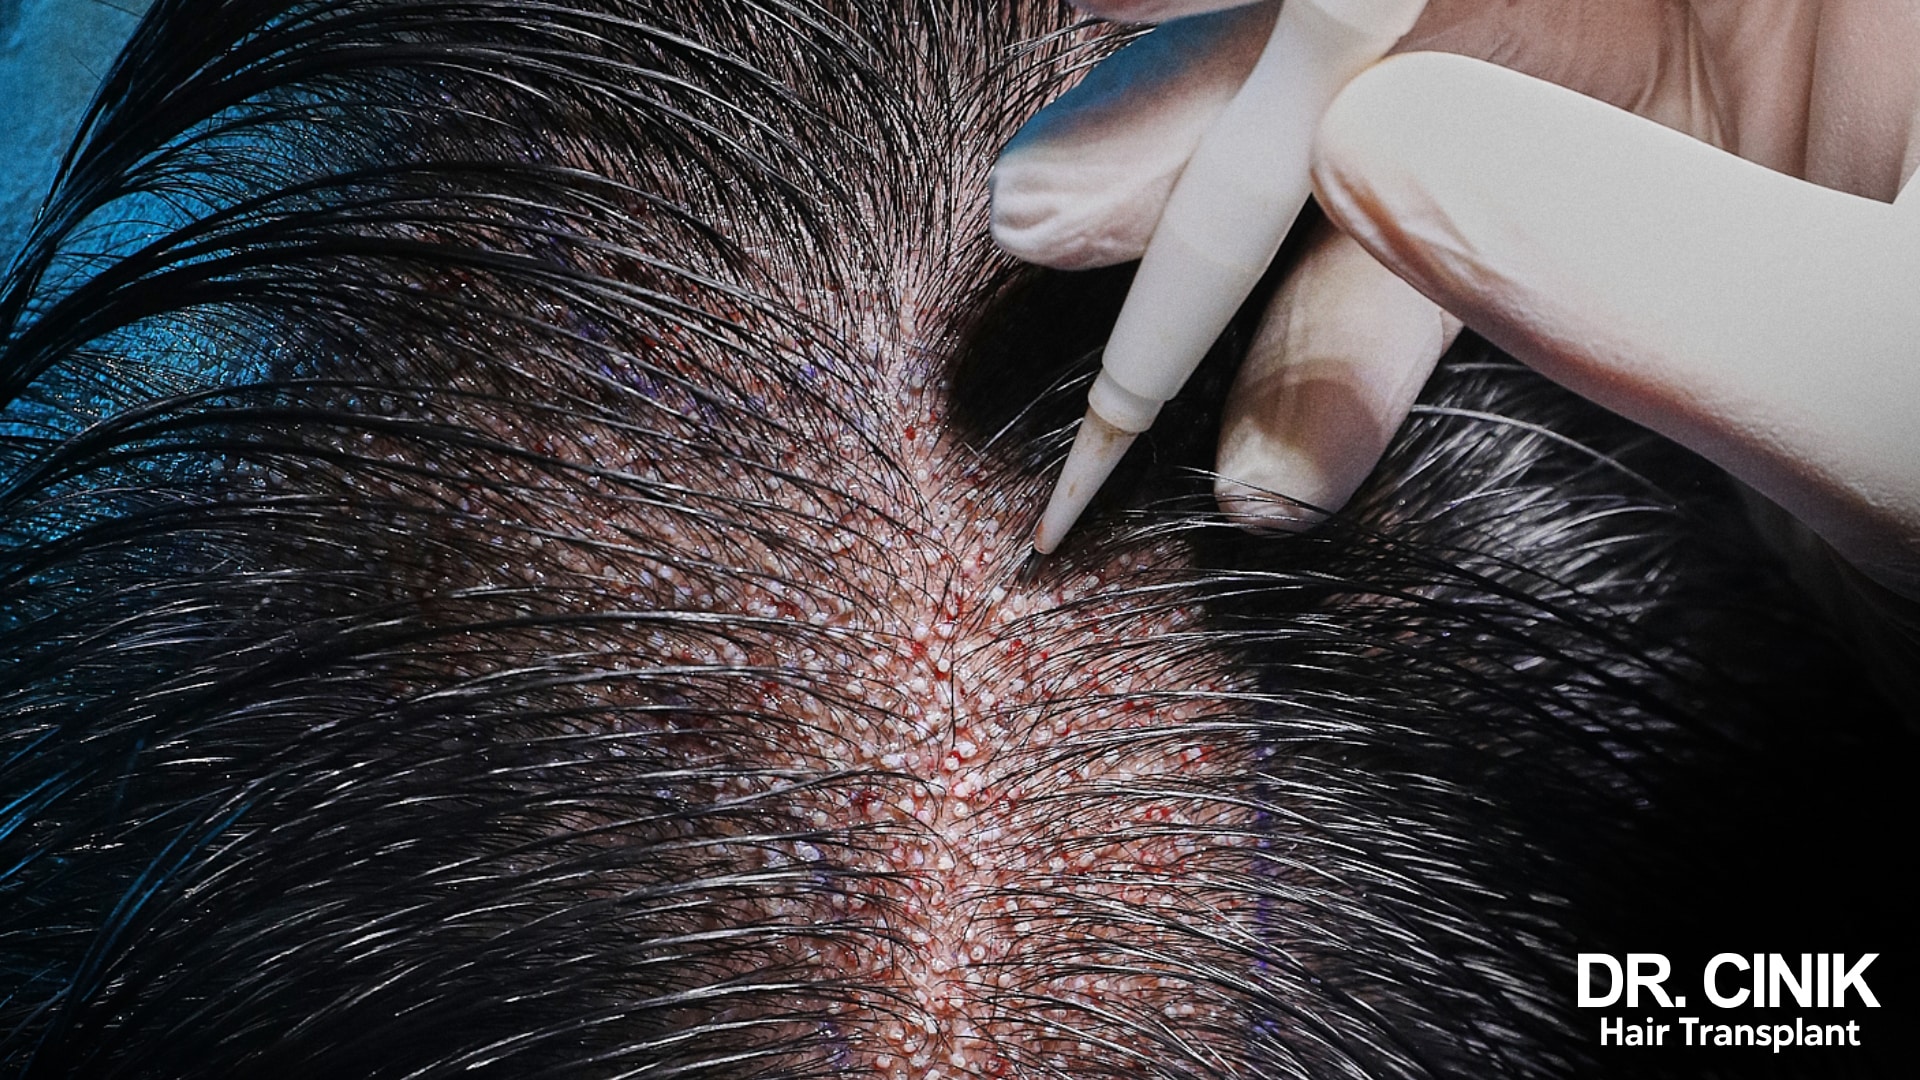 DHI hair transplant, a possible treatment for female hair pattern baldness